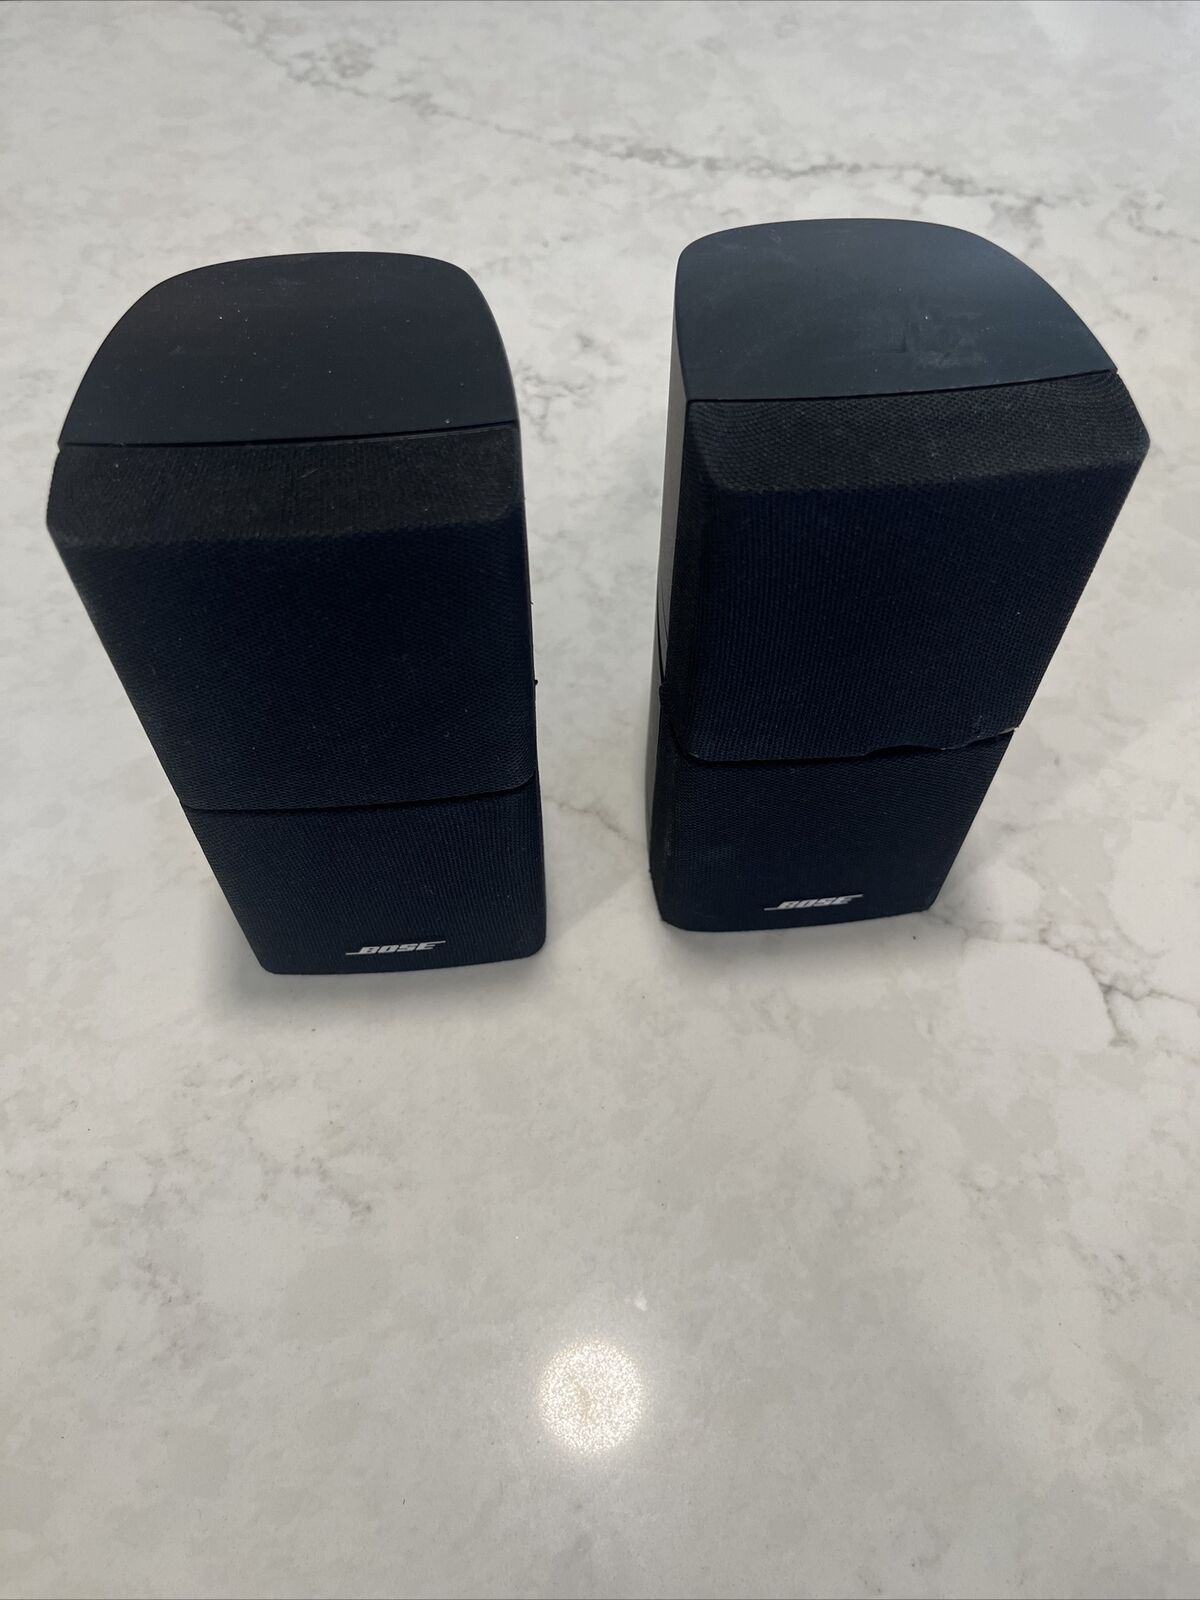 PAIR(2) OF BOSE DOUBLE CUBE ACOUSTIMASS LIFESTYLE SPEAKERS. BLACK. WORKS GREAT 